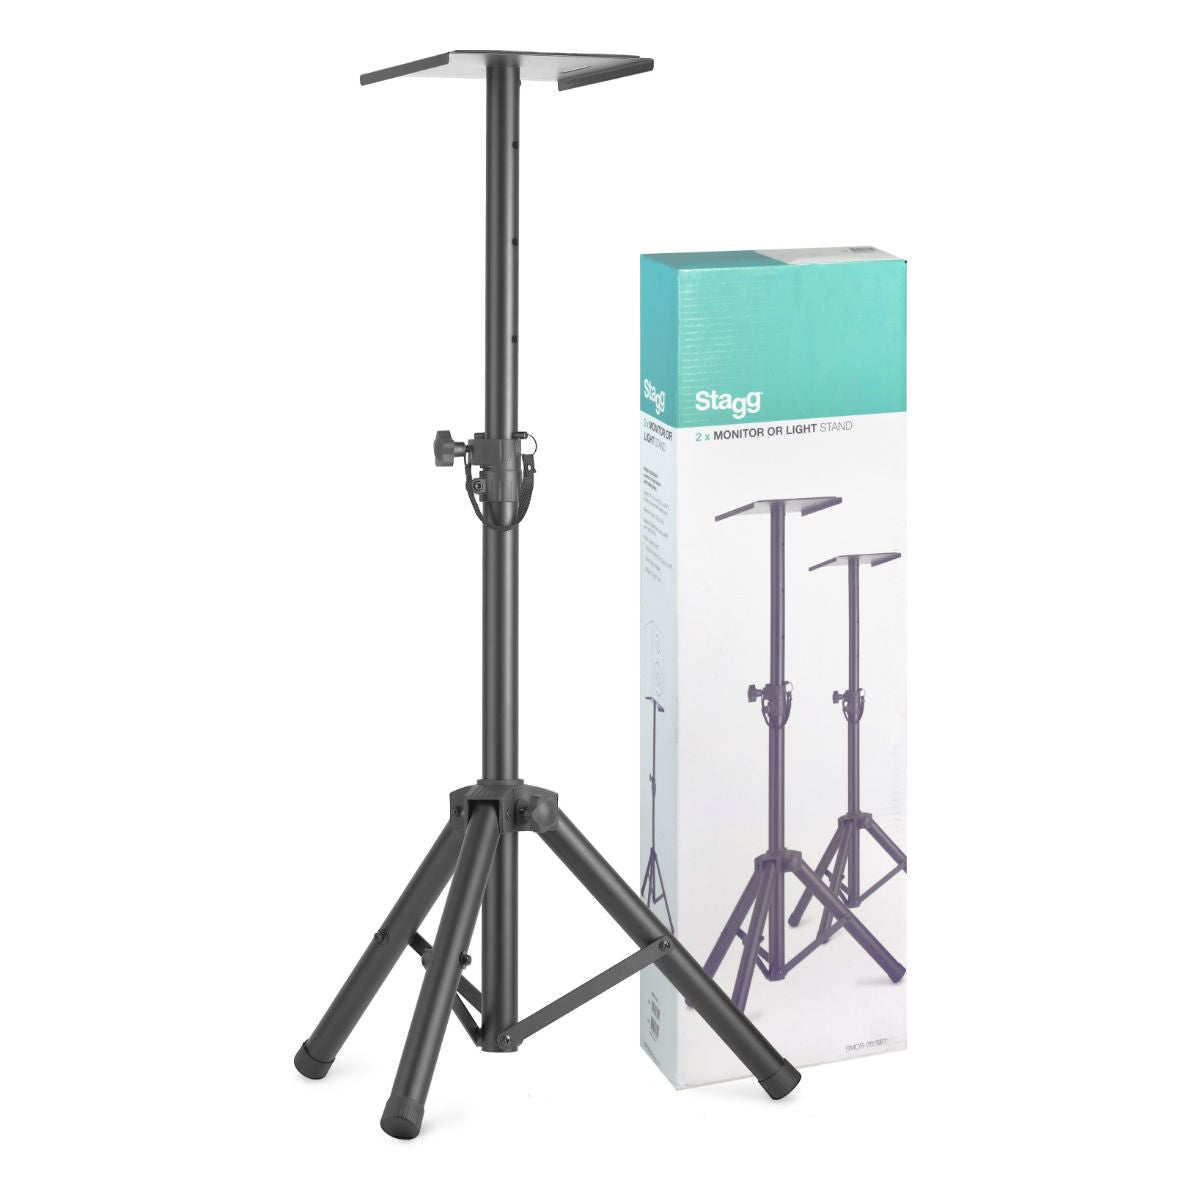 Stagg SMOS-20 SET Floorstanding Monitor Stands (Pair)